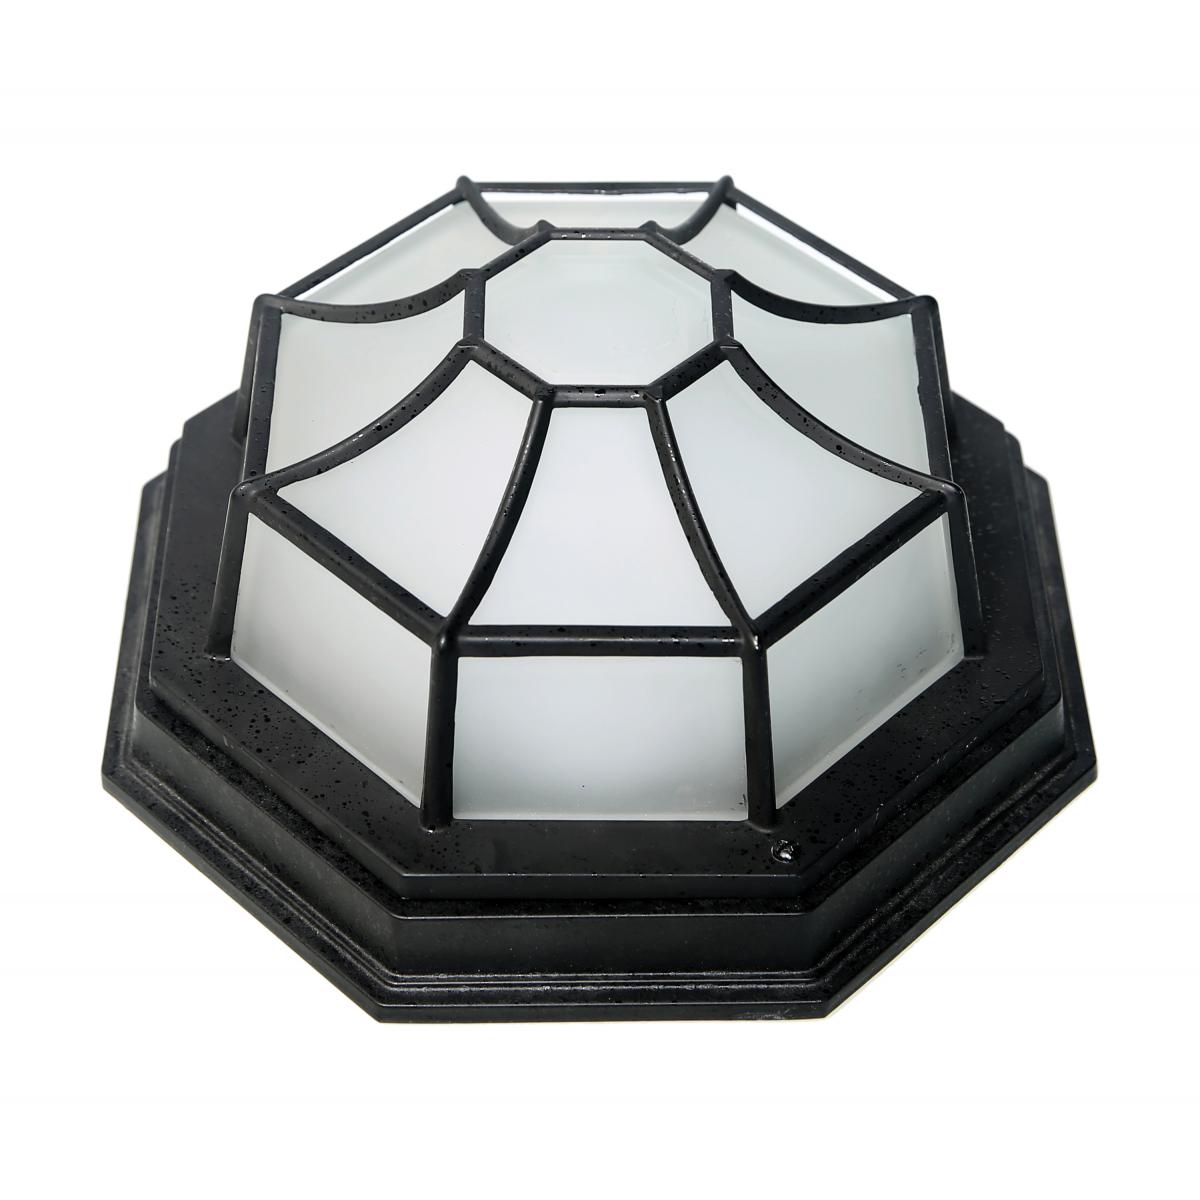 Satco 62-1420 LED Spider Cage Fixture Black Finish with Frosted Glass